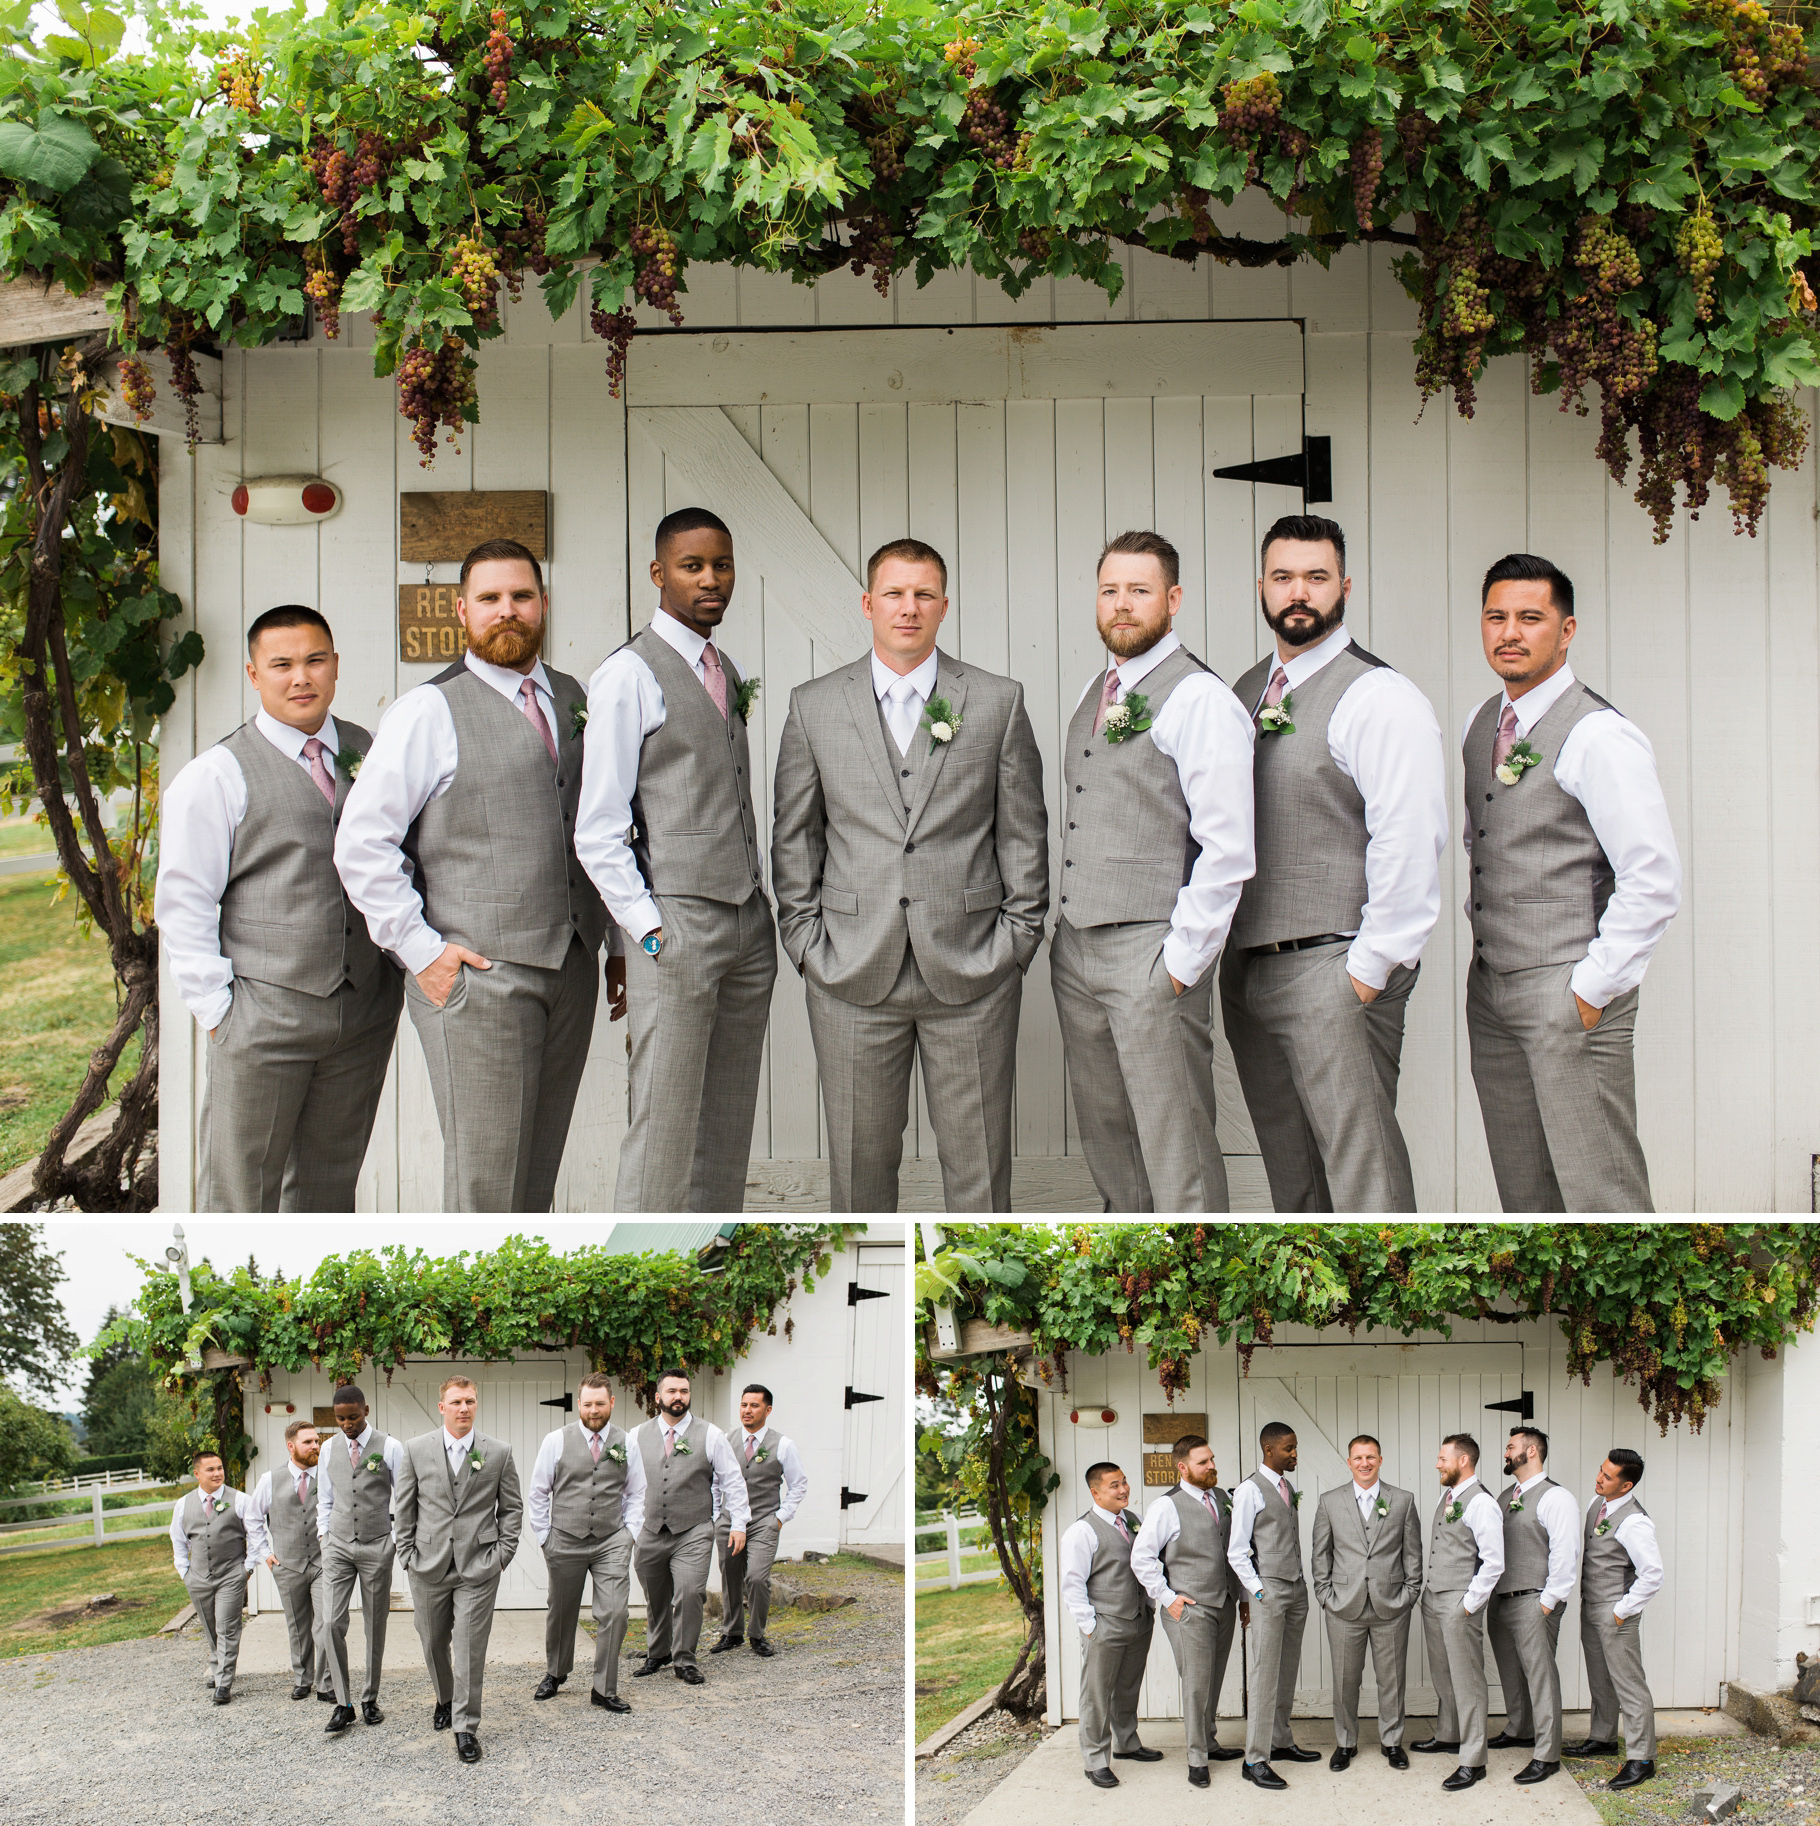 20-Delille-Cellars-Chateau-Vineyard-Groom-Groomsmen-Wedding-Photography-by-Betty-Elaine-Woodinville-Winery-Seattle-Photographer